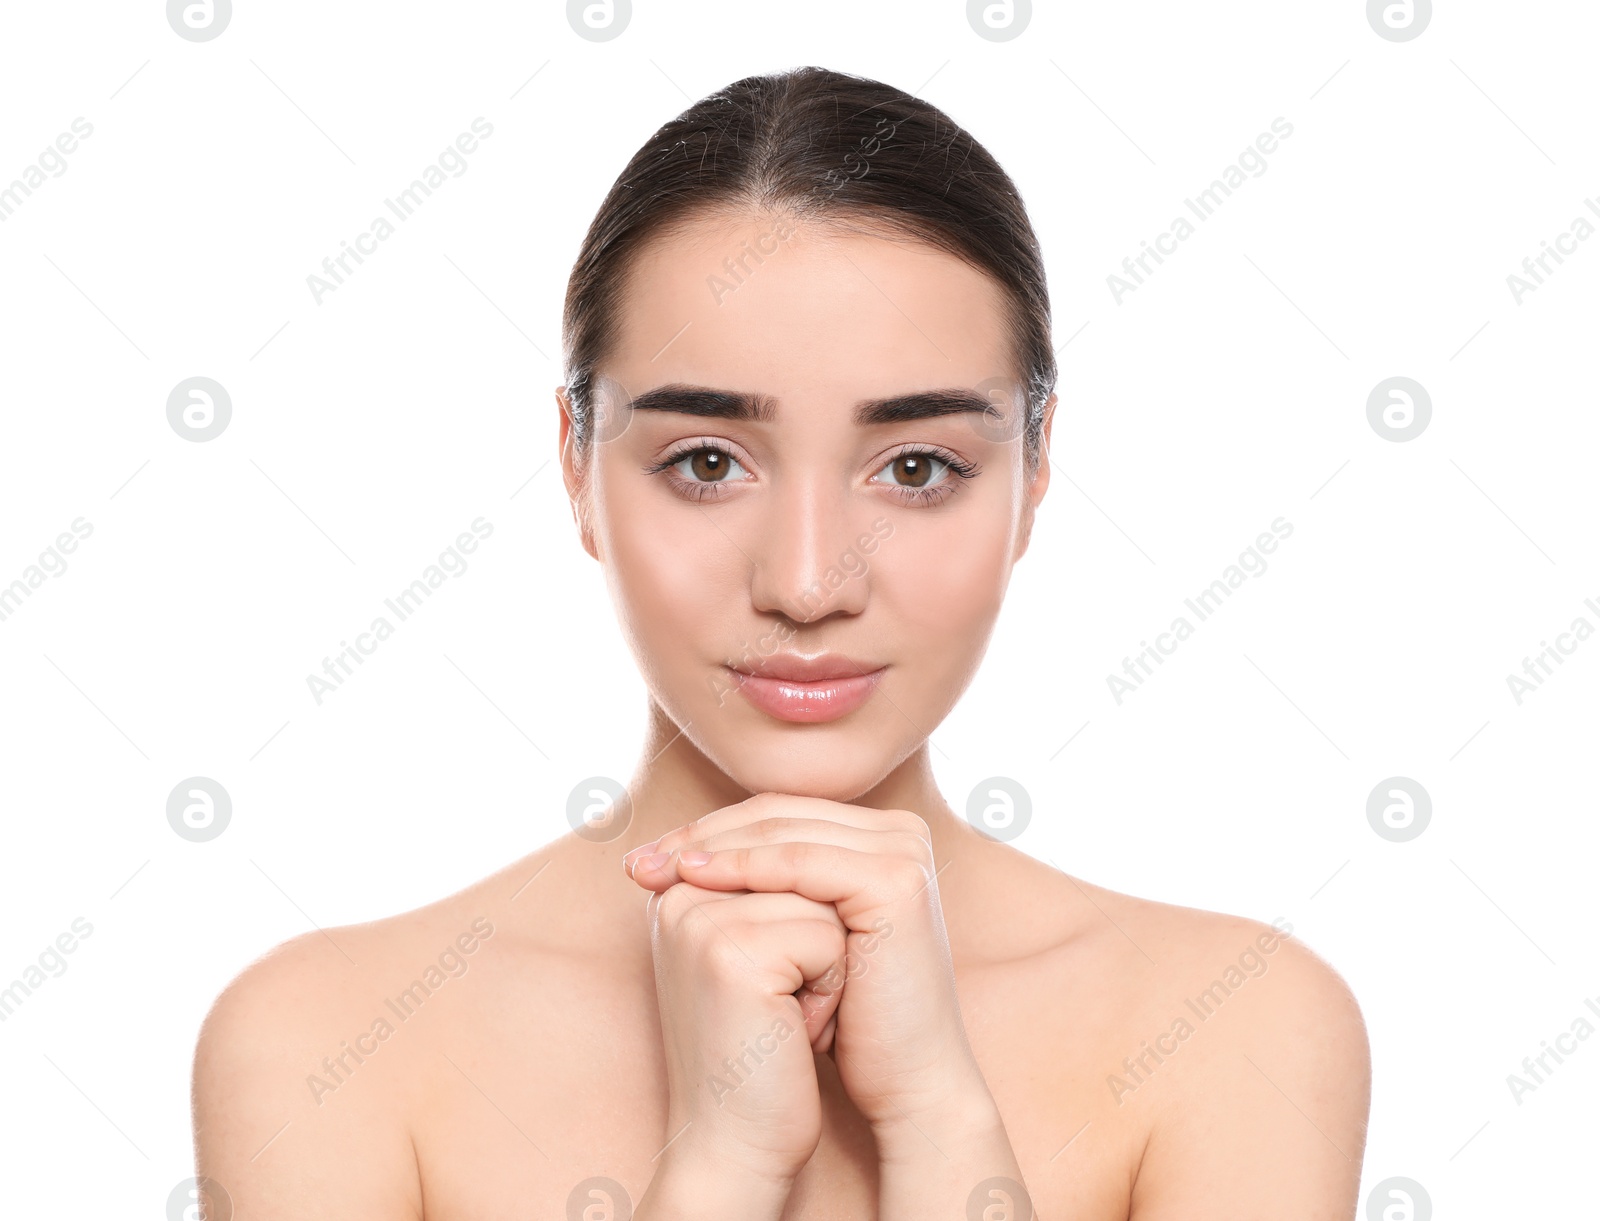 Photo of Portrait of young woman with beautiful face against white background